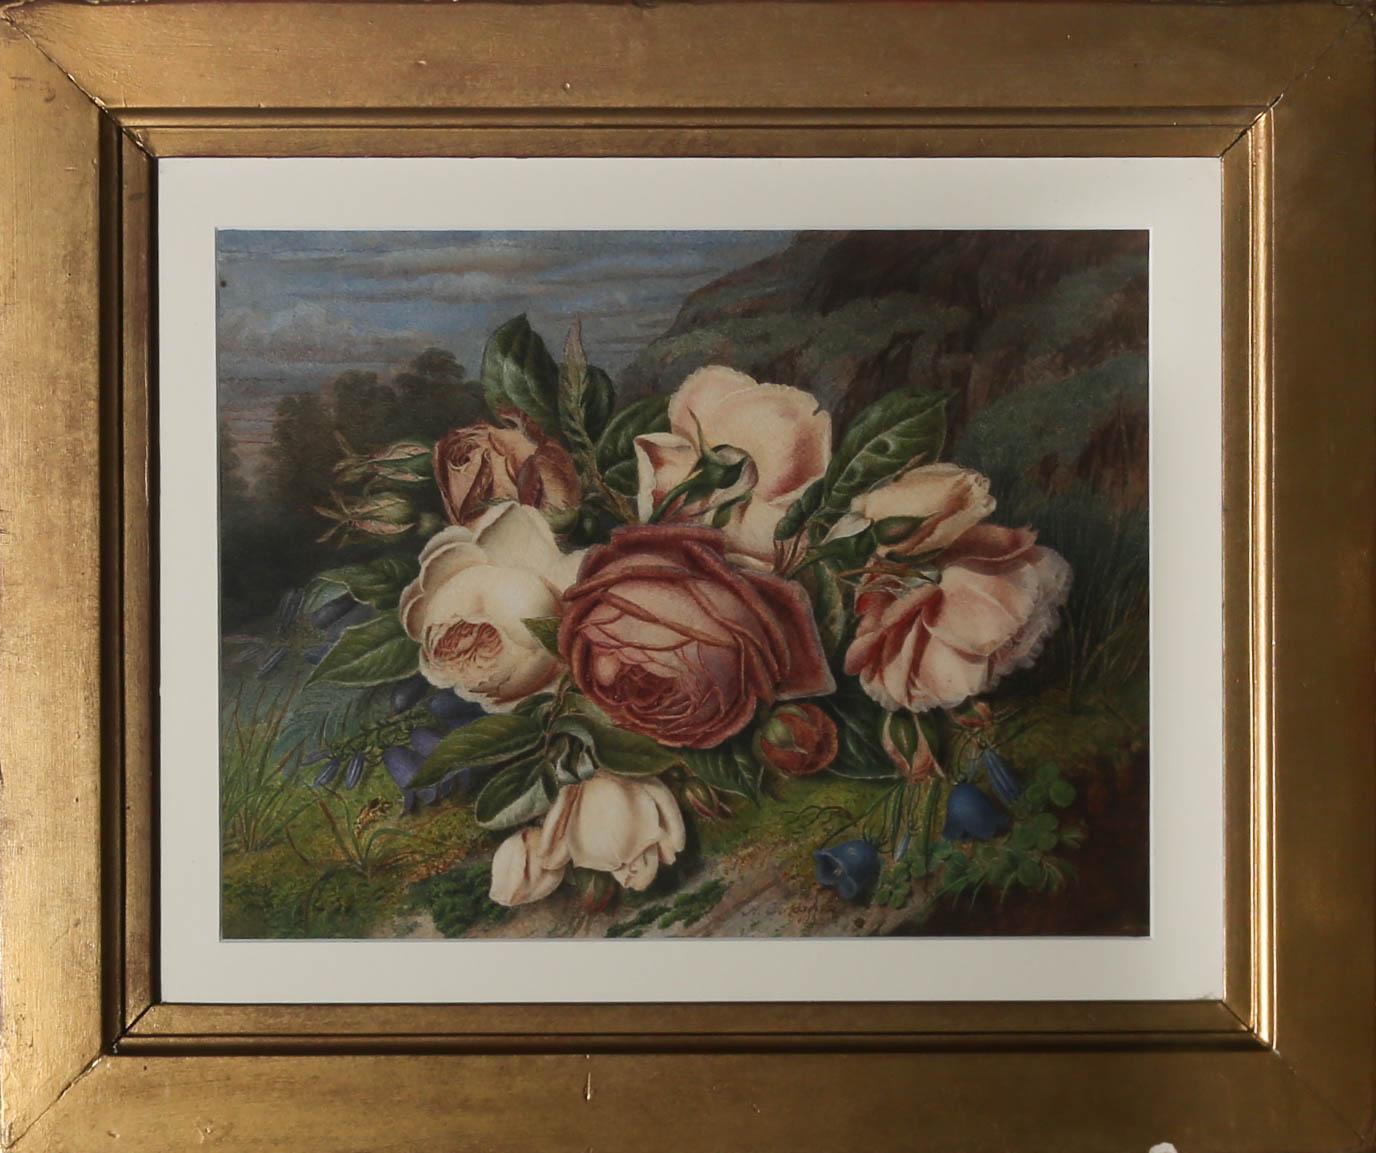 A charming 19th Century floral watercolour showing a bouquet of roses and delicate purple campanula on a grassy hillside. The artist has signed and dated faintly to the lower edge. Presented in a simple gilt frame with card mount. On paper.